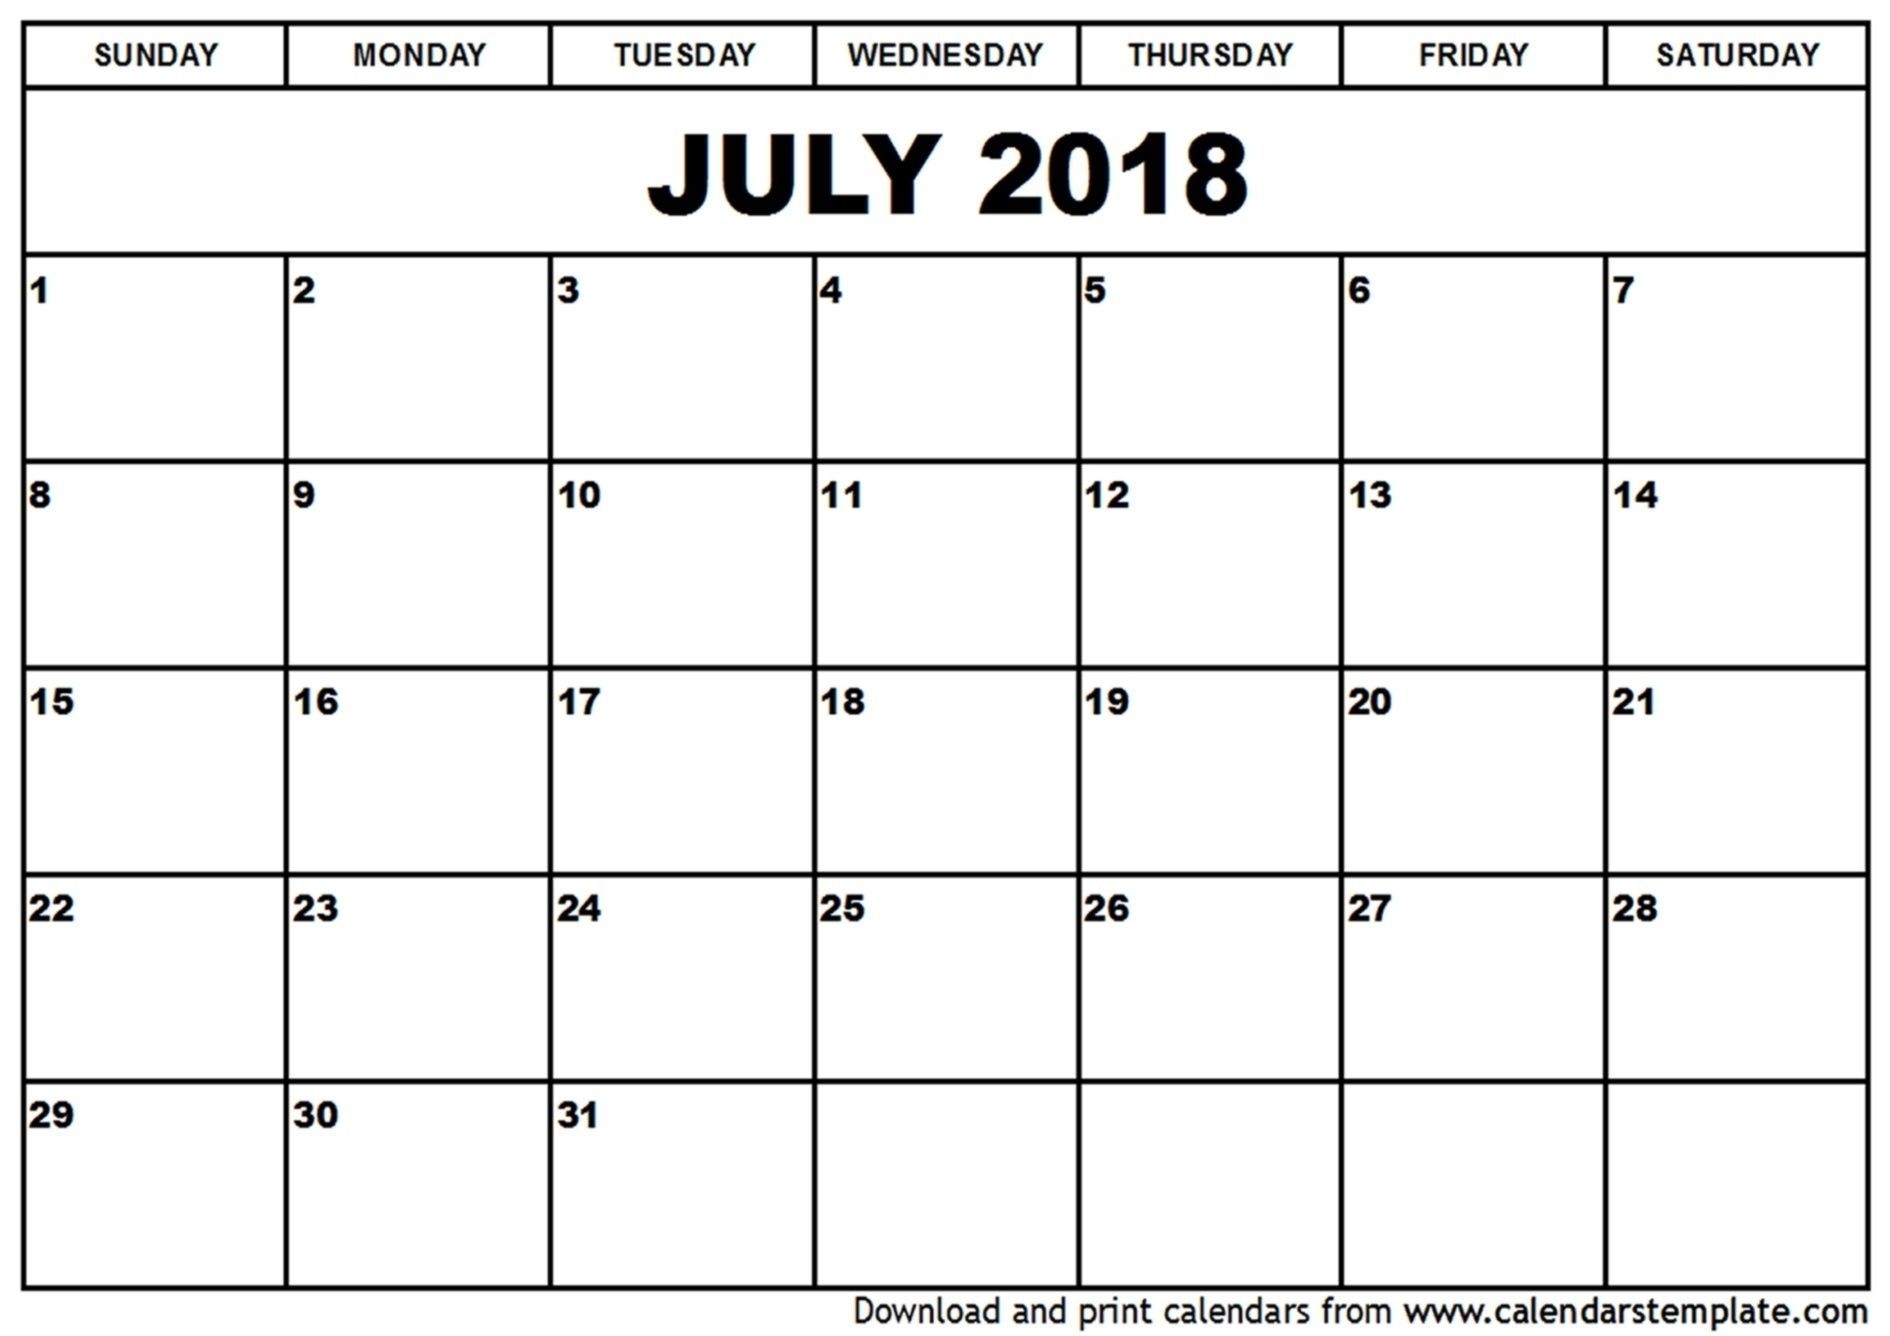 free printable 4x6 monthly calendar in 2020 | blank monthly